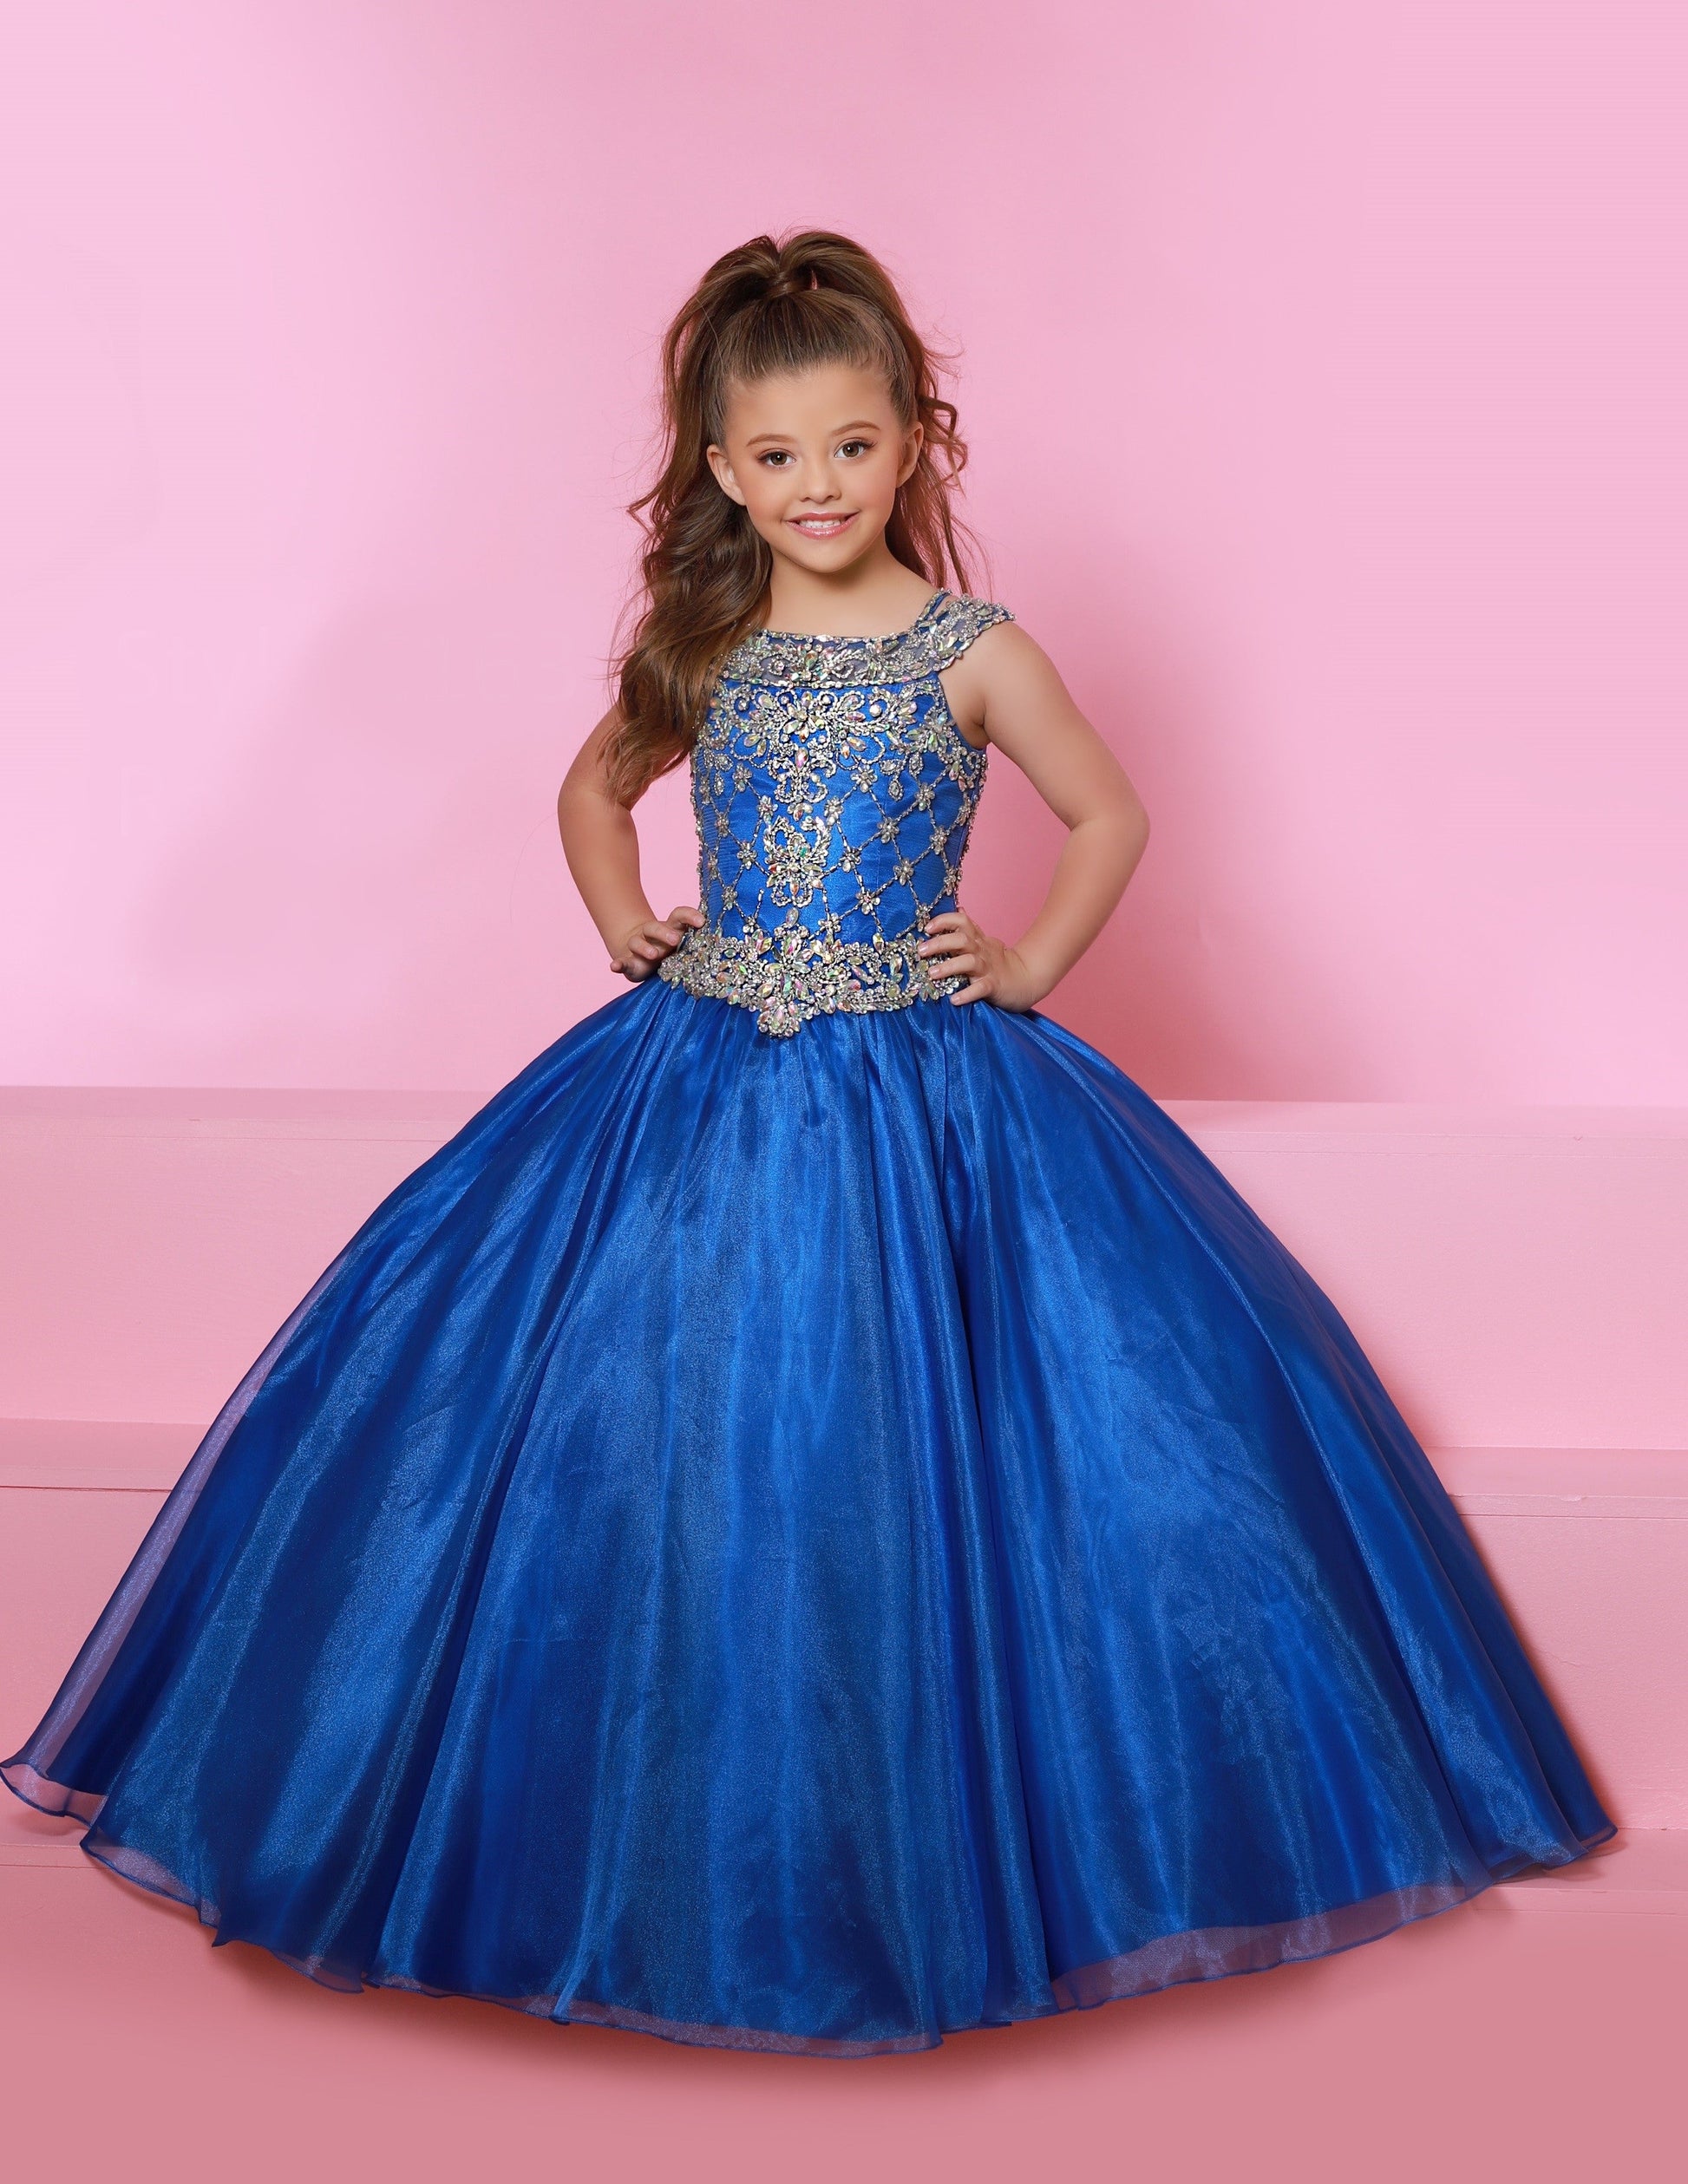 in Stock Sugar Kayne C169 Size 10, 12 Long Girls Pageant Ballgown Ombre One Shoulder Dress 12 / Blueberry/Ombre